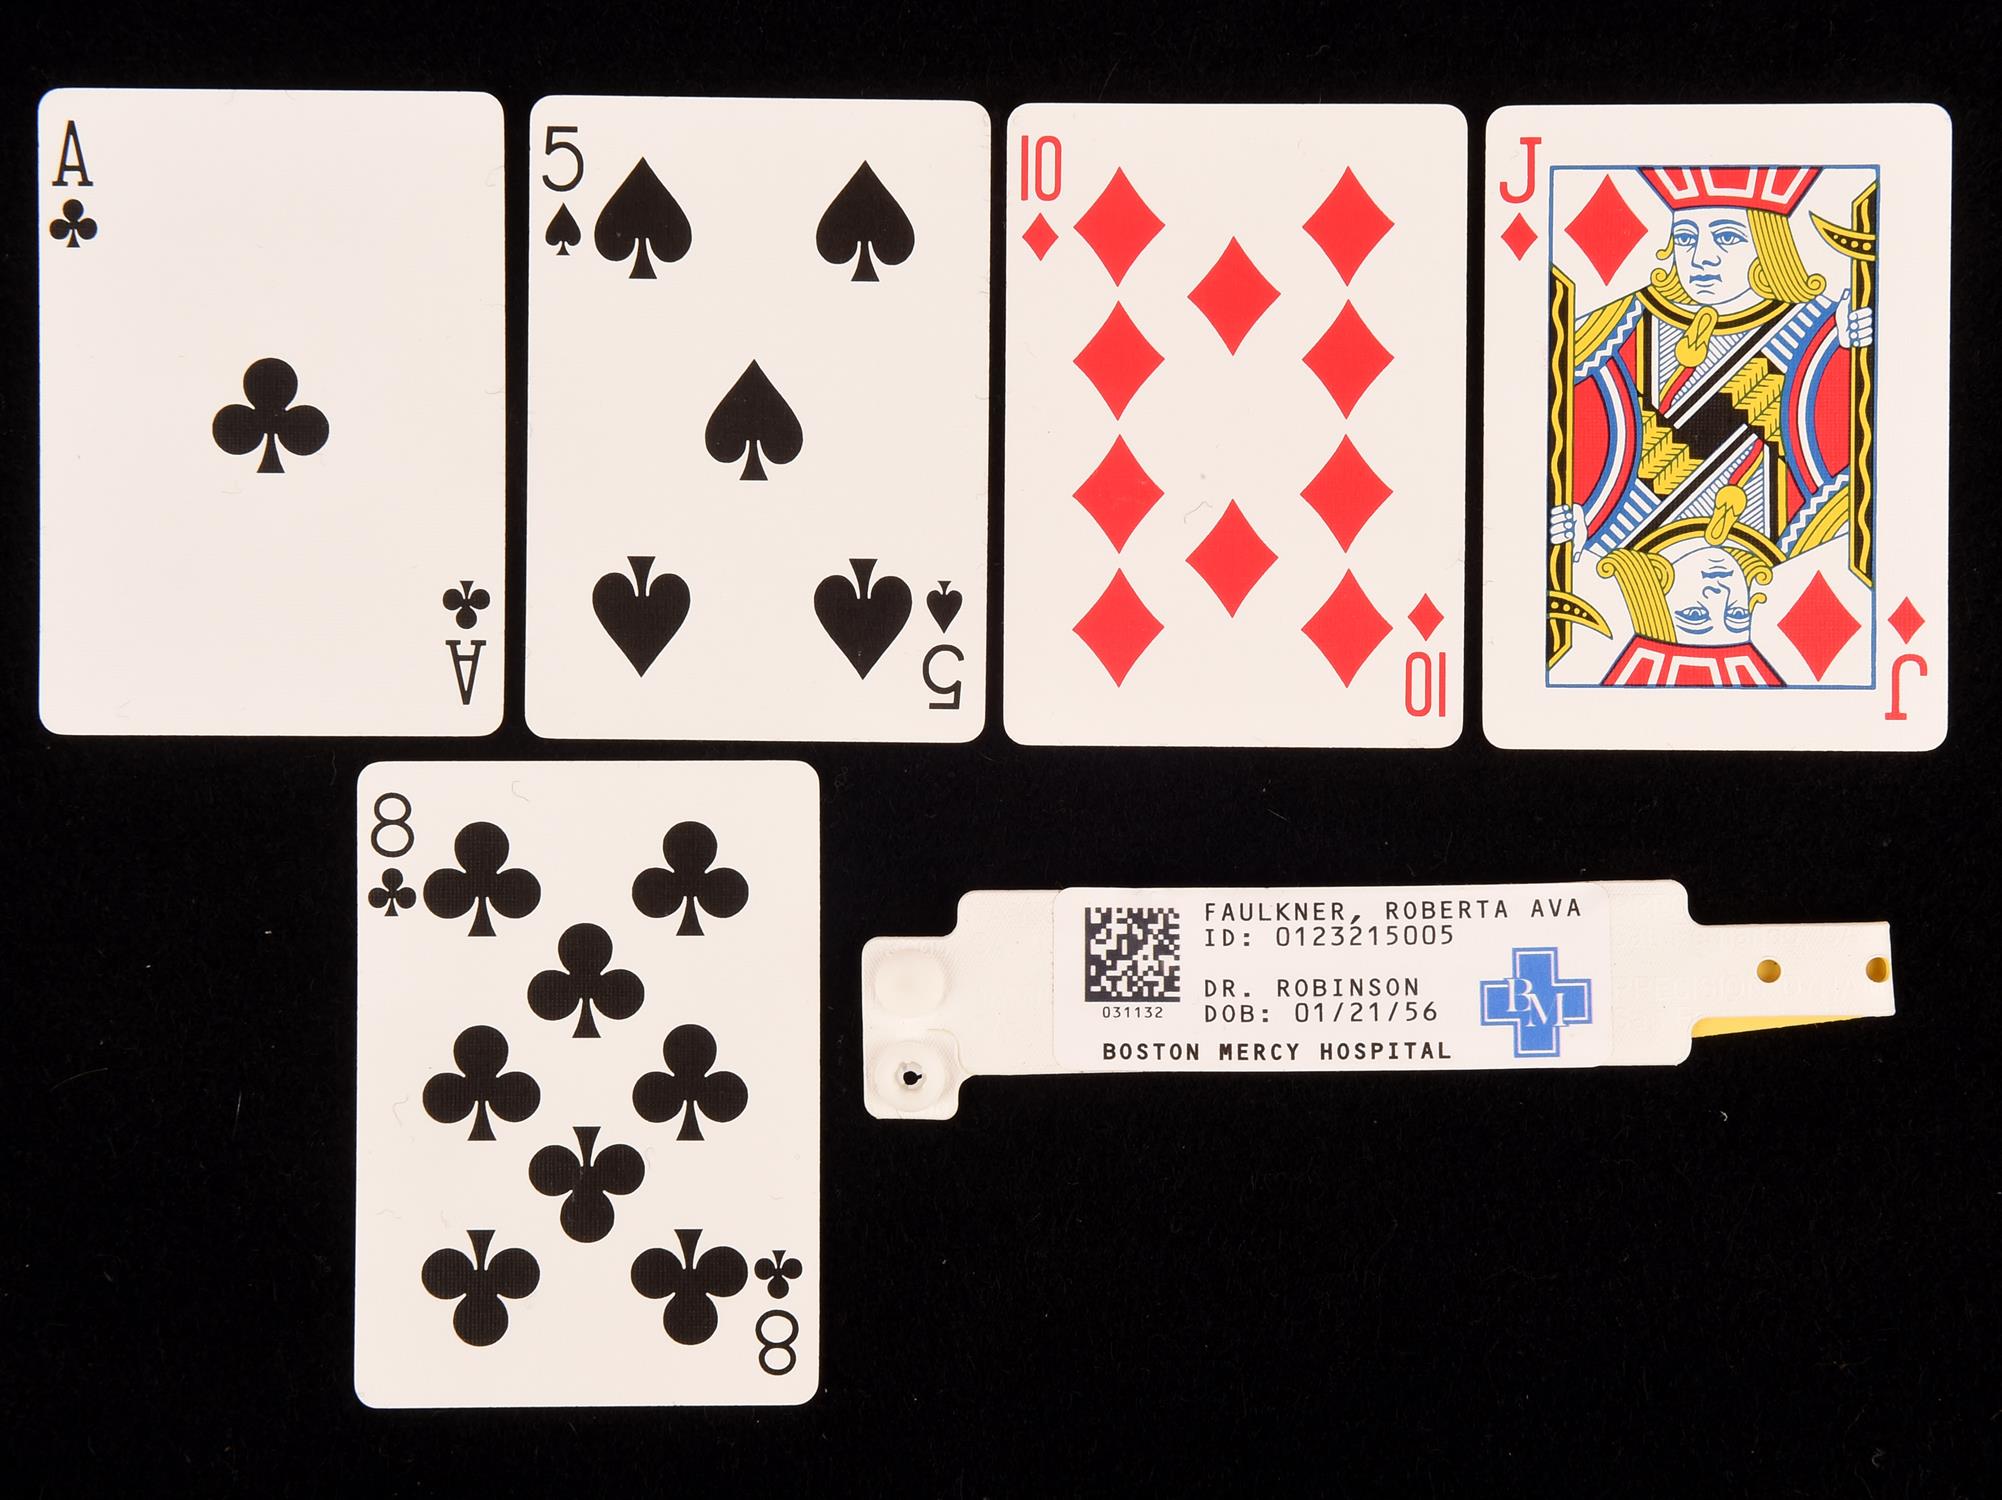 Ava (2020) - A set of Five Playing Cards from the card game between Geena Davis and Jessica